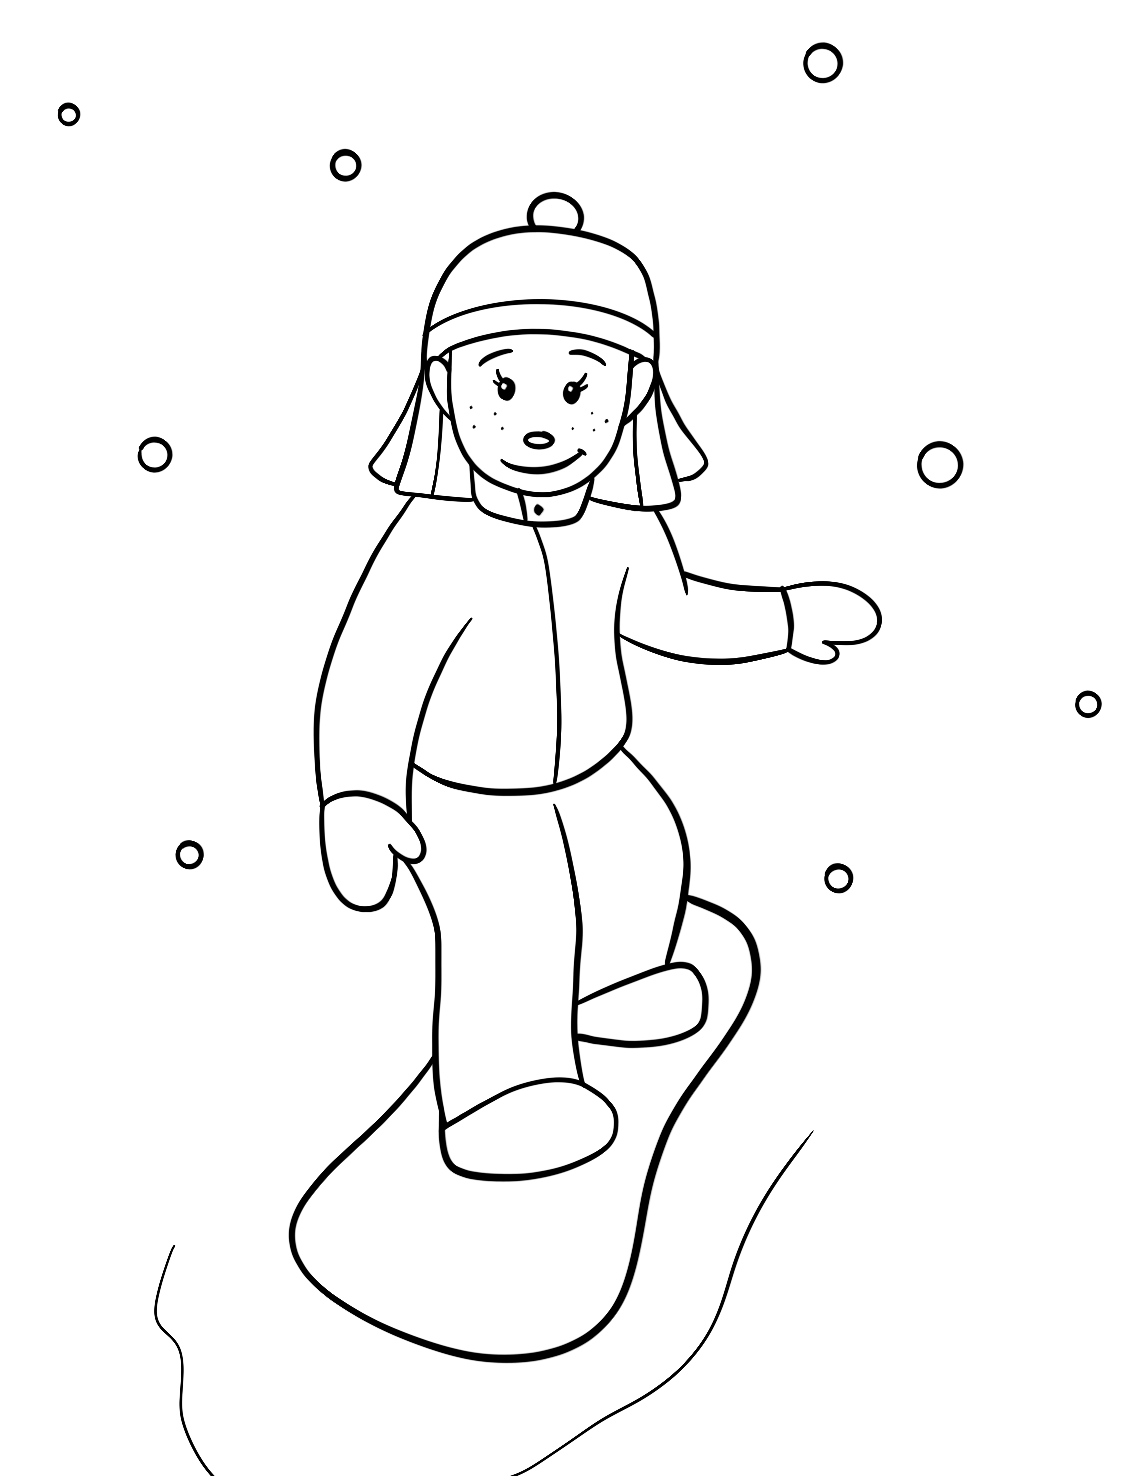 snowboarding coloring pages free